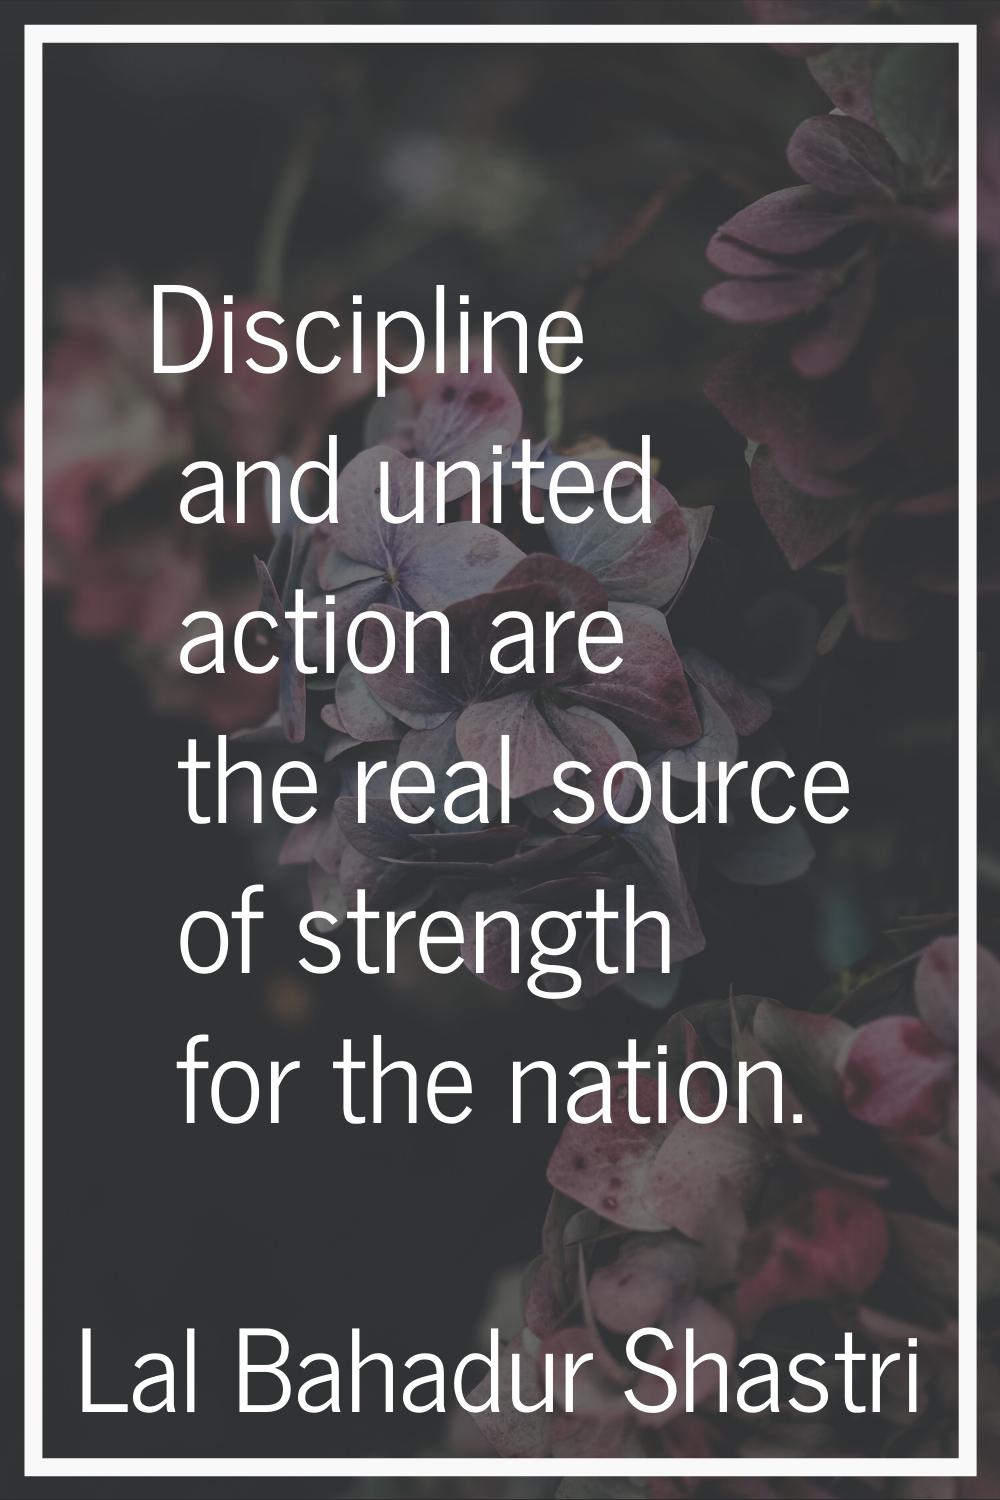 Discipline and united action are the real source of strength for the nation.